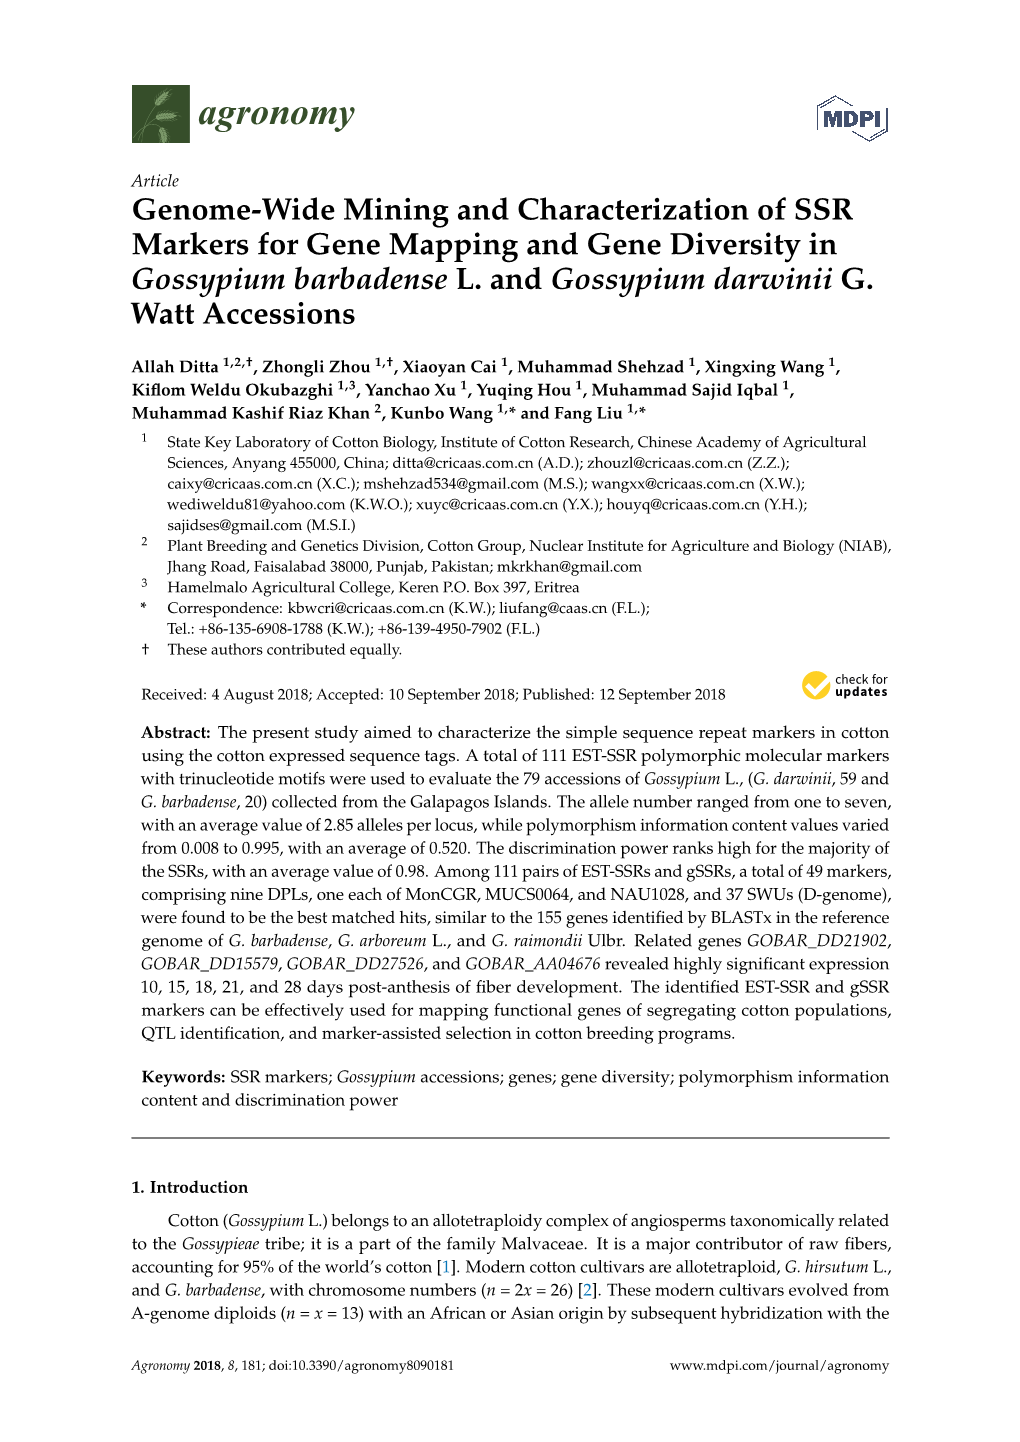 Genome-Wide Mining and Characterization of SSR Markers for Gene Mapping and Gene Diversity in Gossypium Barbadense L